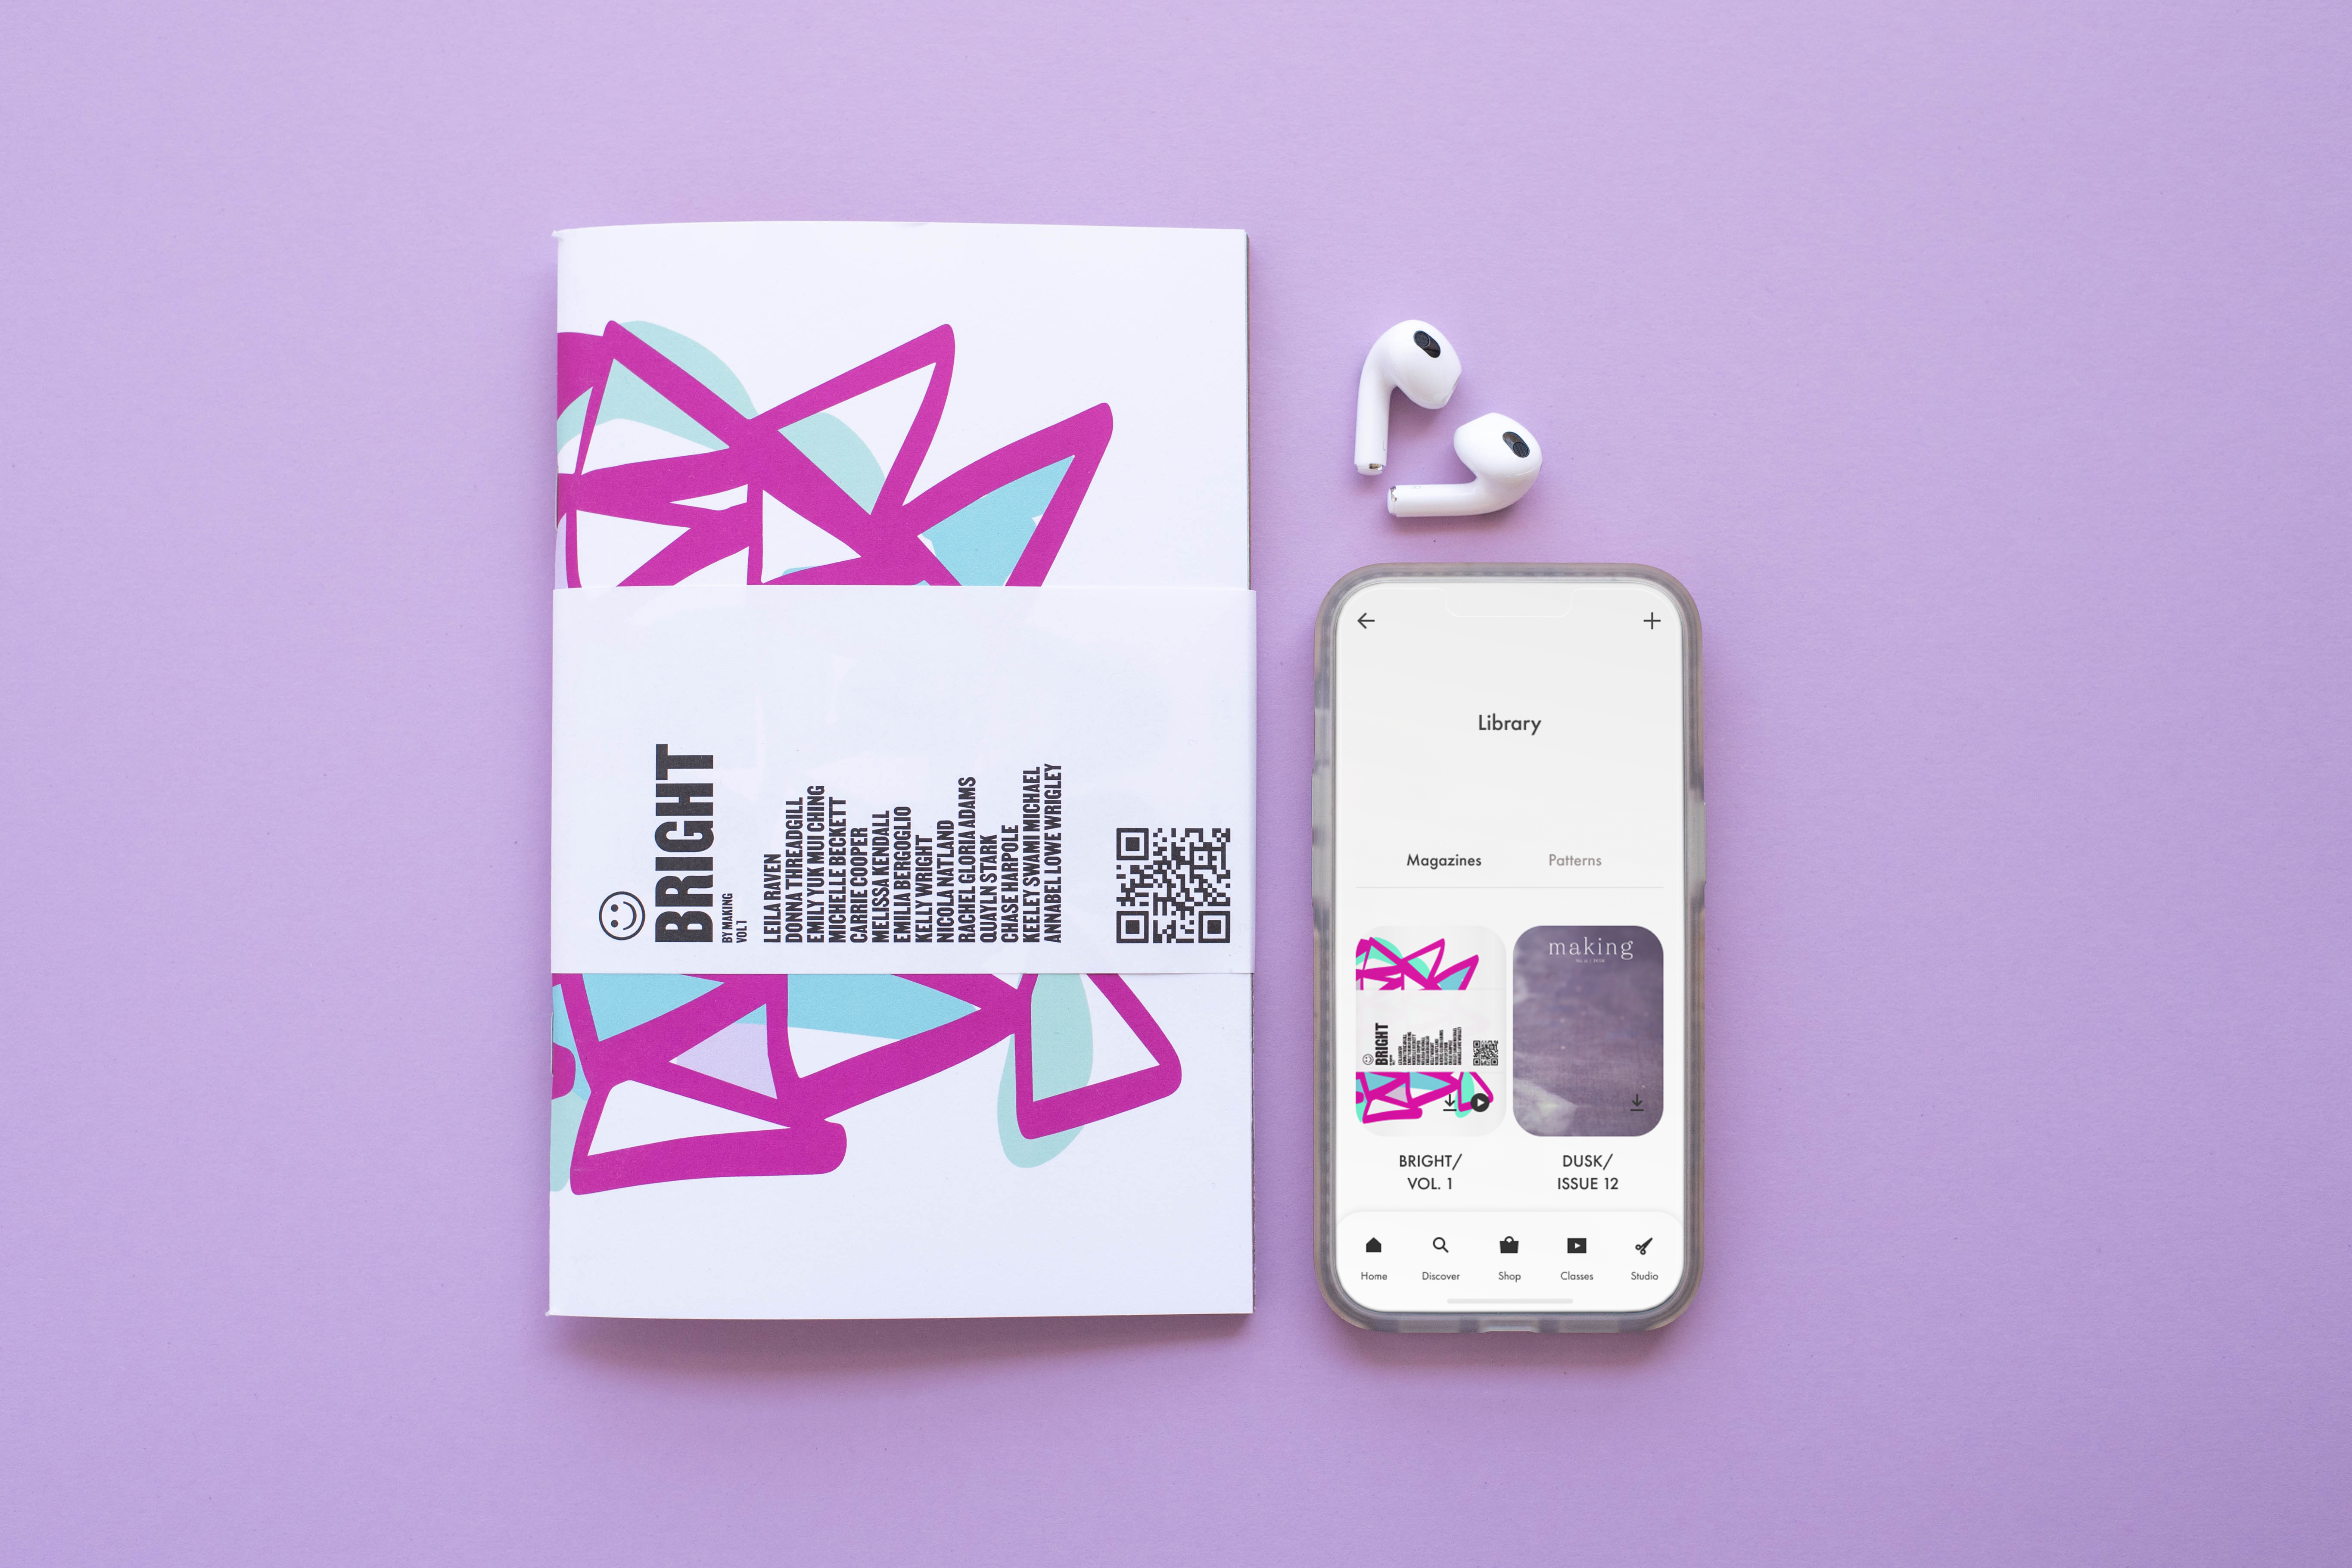 Bright Vol. 1 print magazine and digital issue shown on a phone with bluetooth headphones on a purple background.